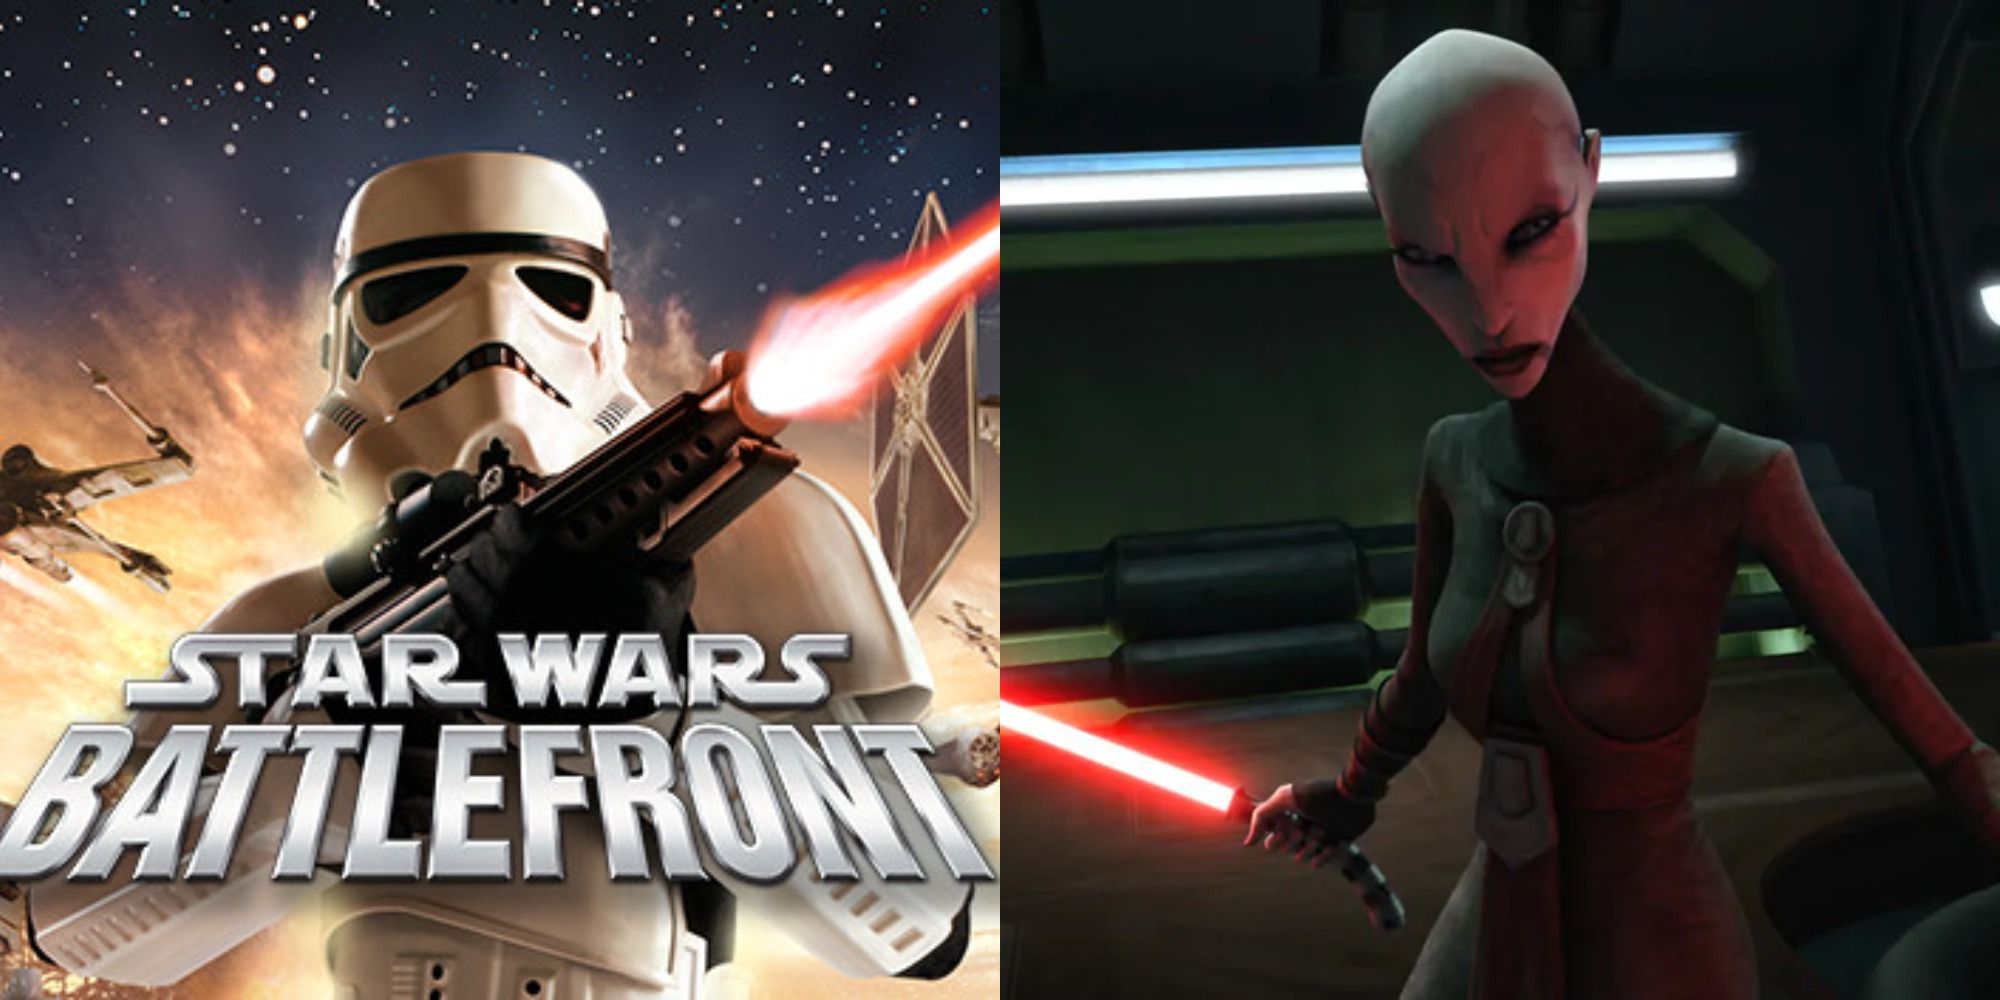 Split image showing the cover for Star Wars Battlefront and Asajj Ventress